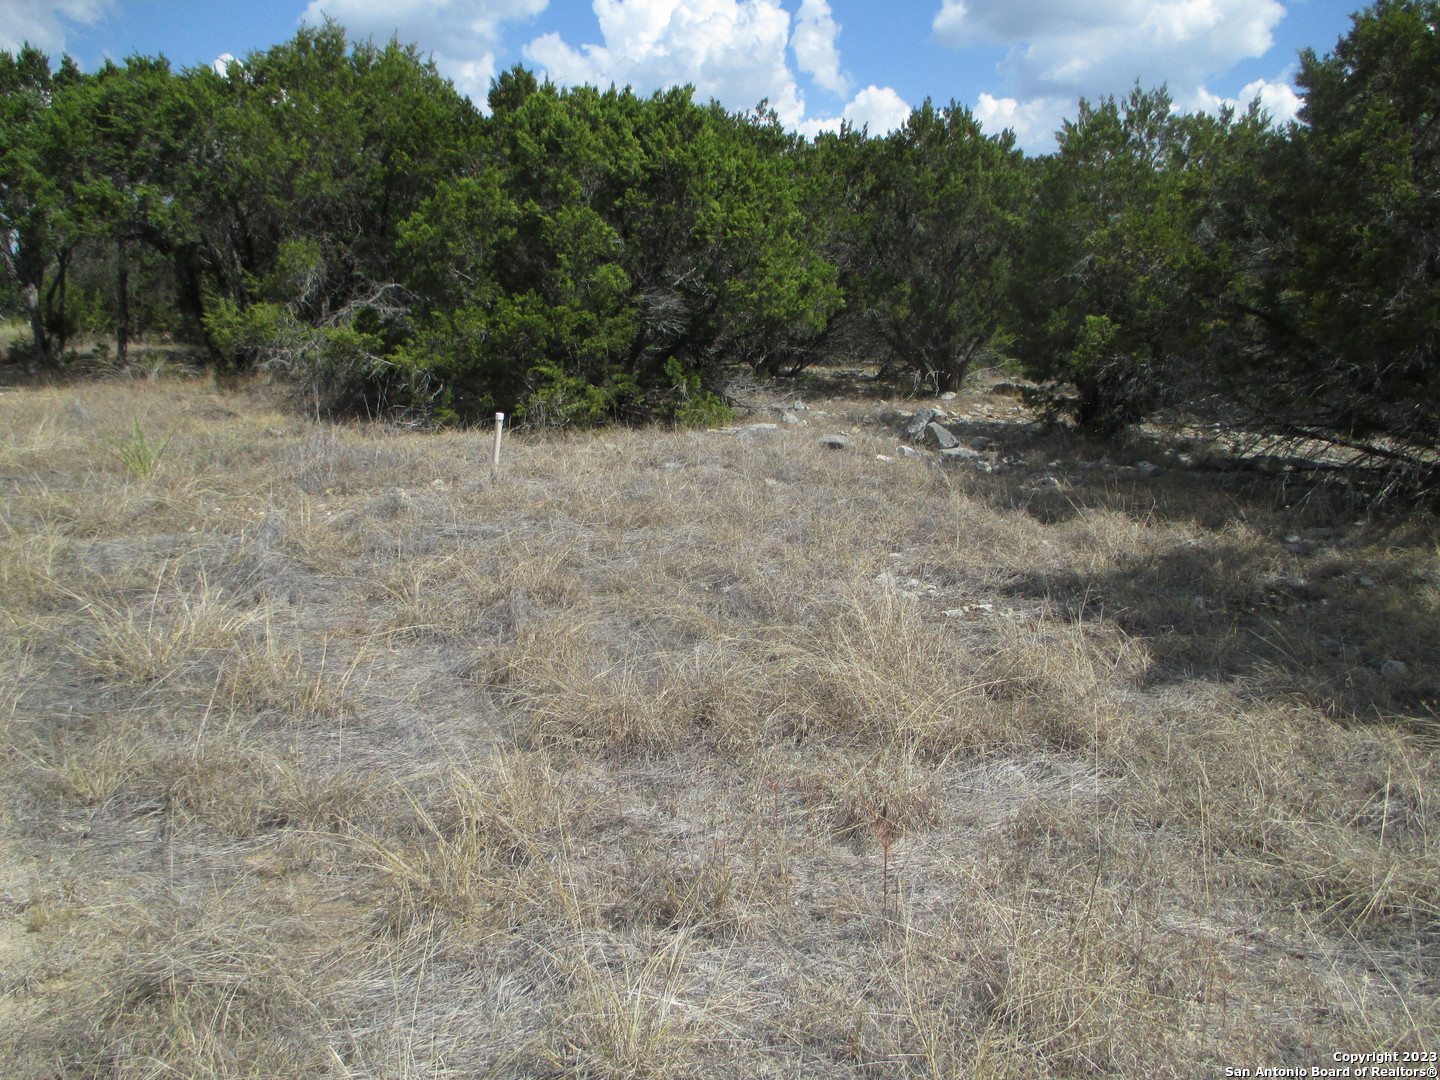 a view of a dry yard with trees in the background